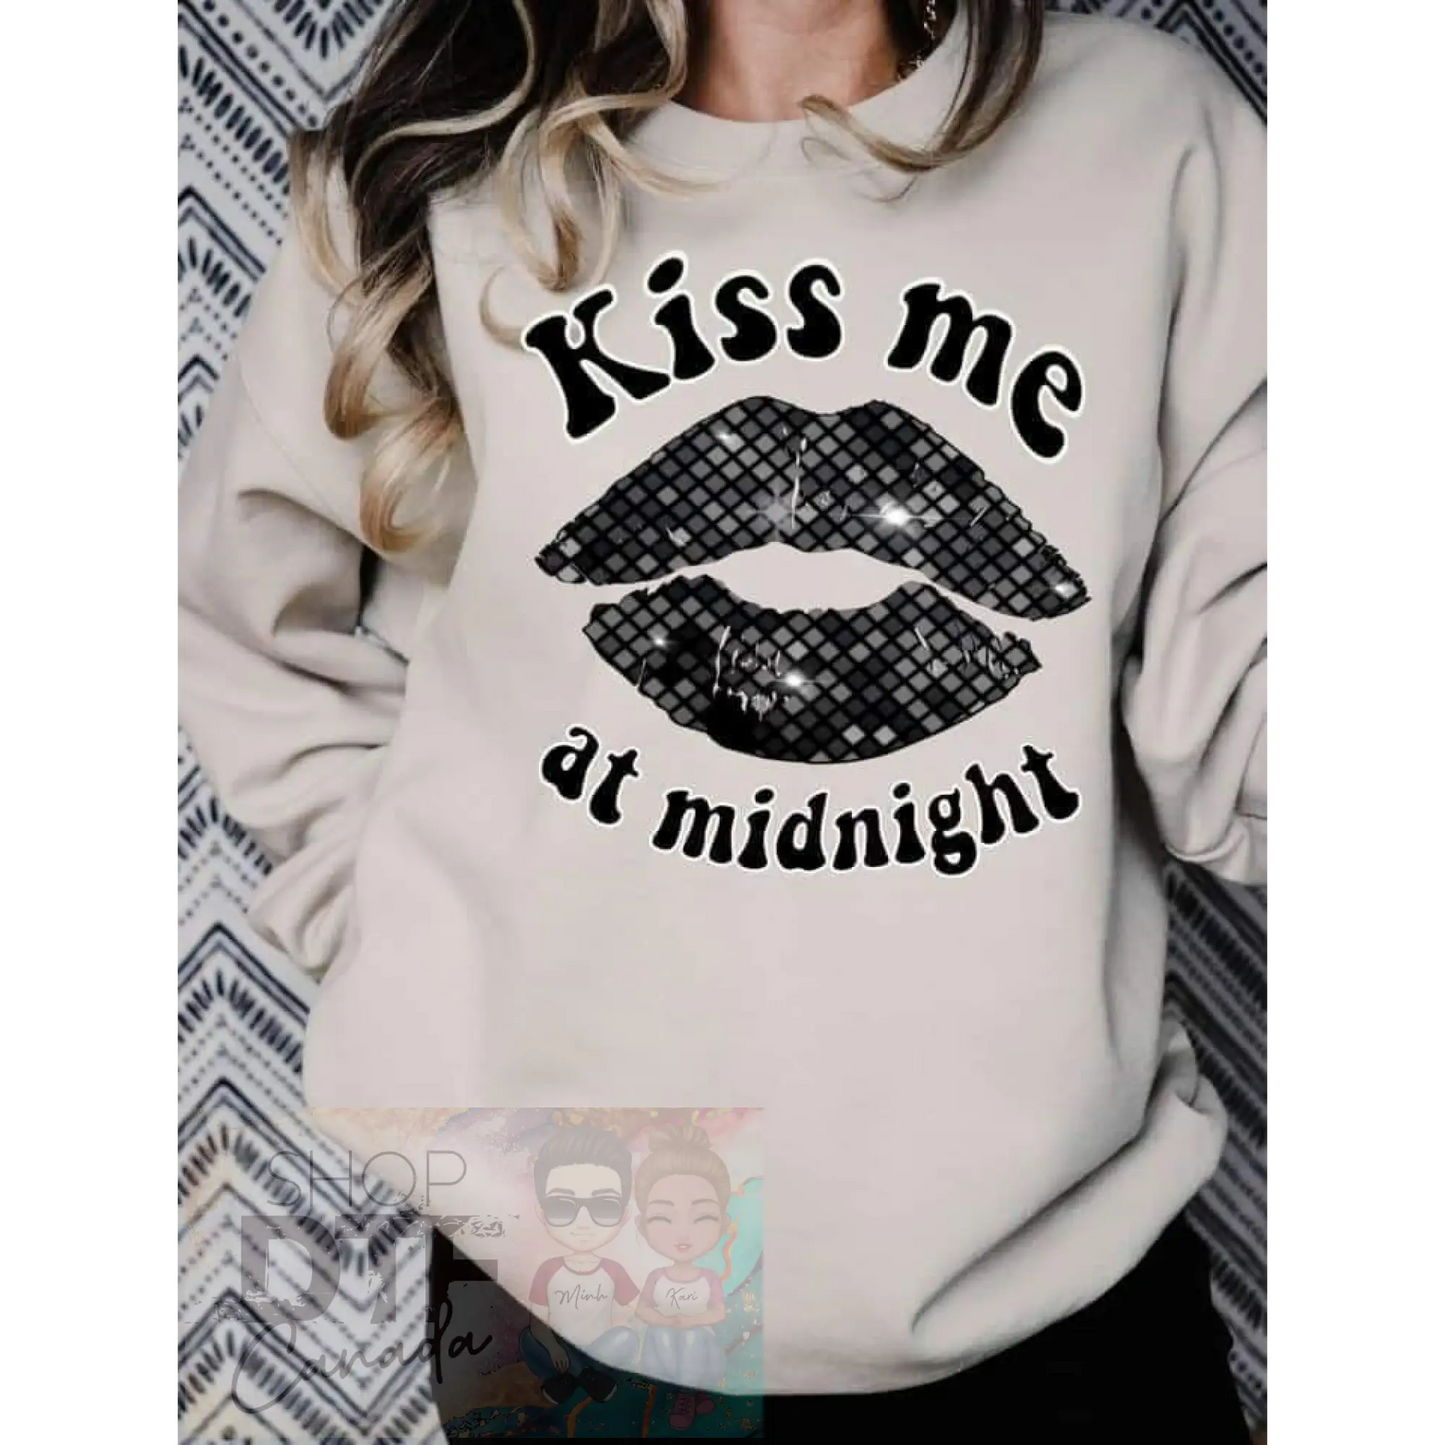 Valentine’s Day - kiss me at midnight - Shirts & Tops